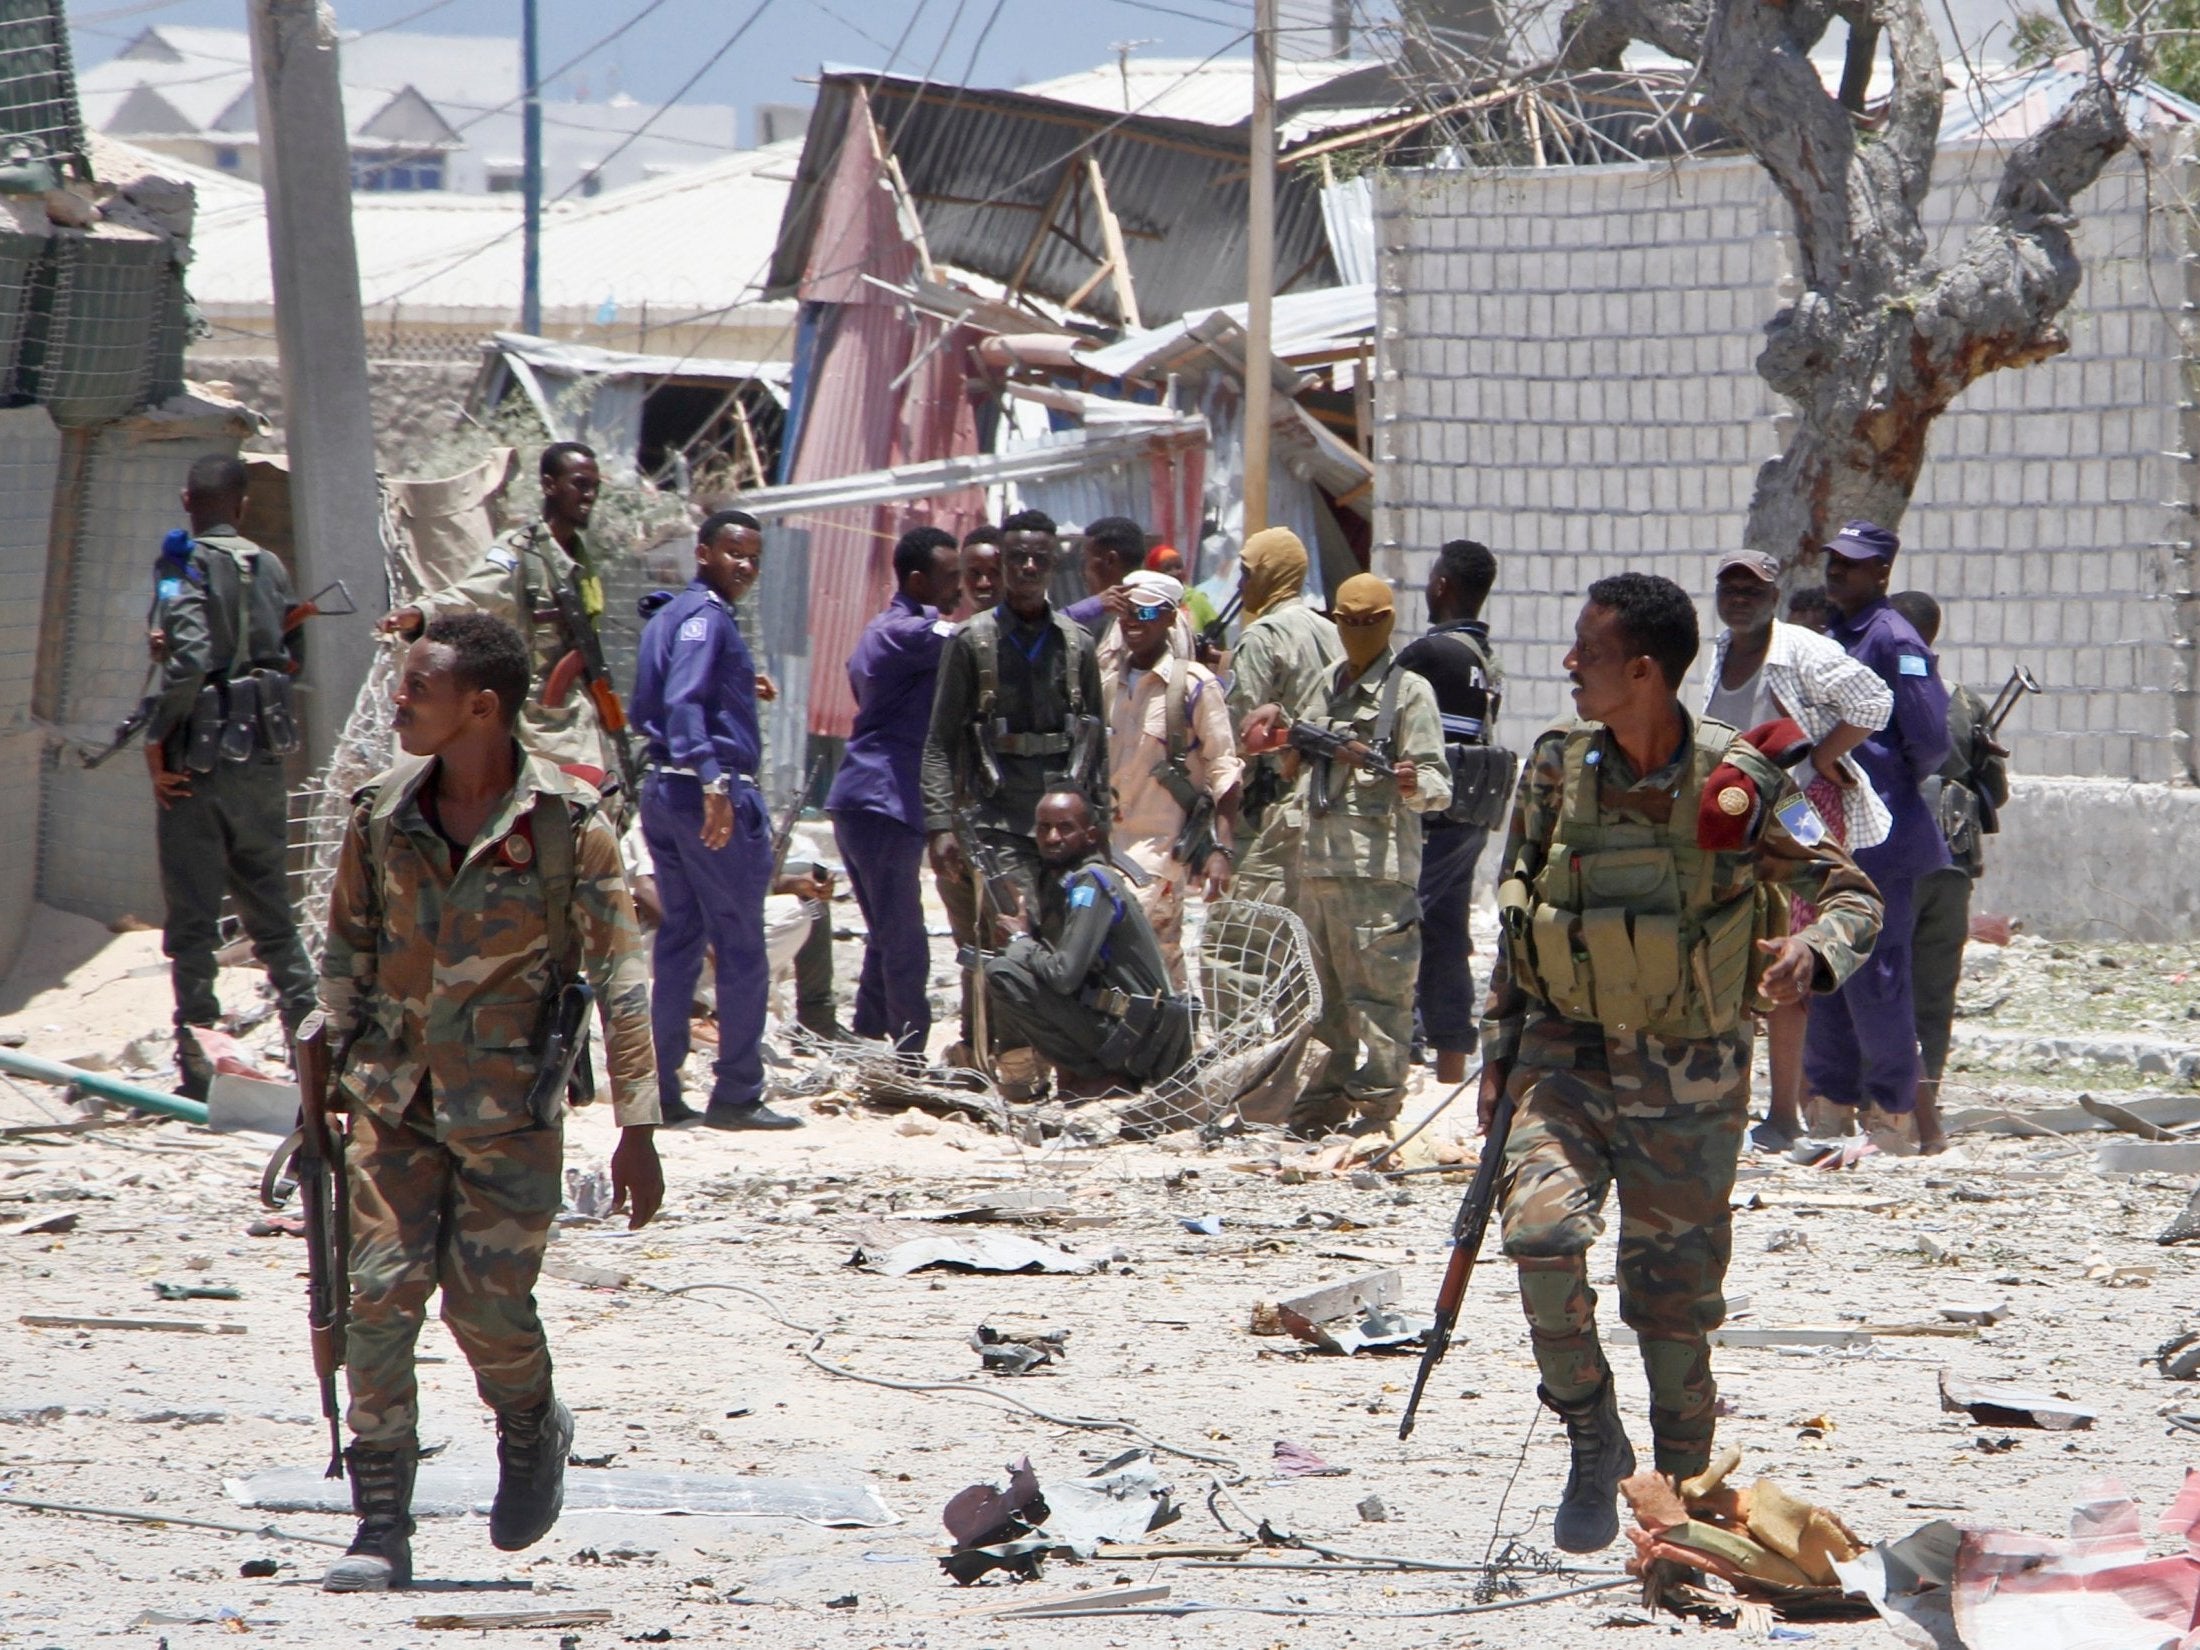 Somali government soldiers take positions during the gun battle with al-Shabaab fighters in Mogadishu